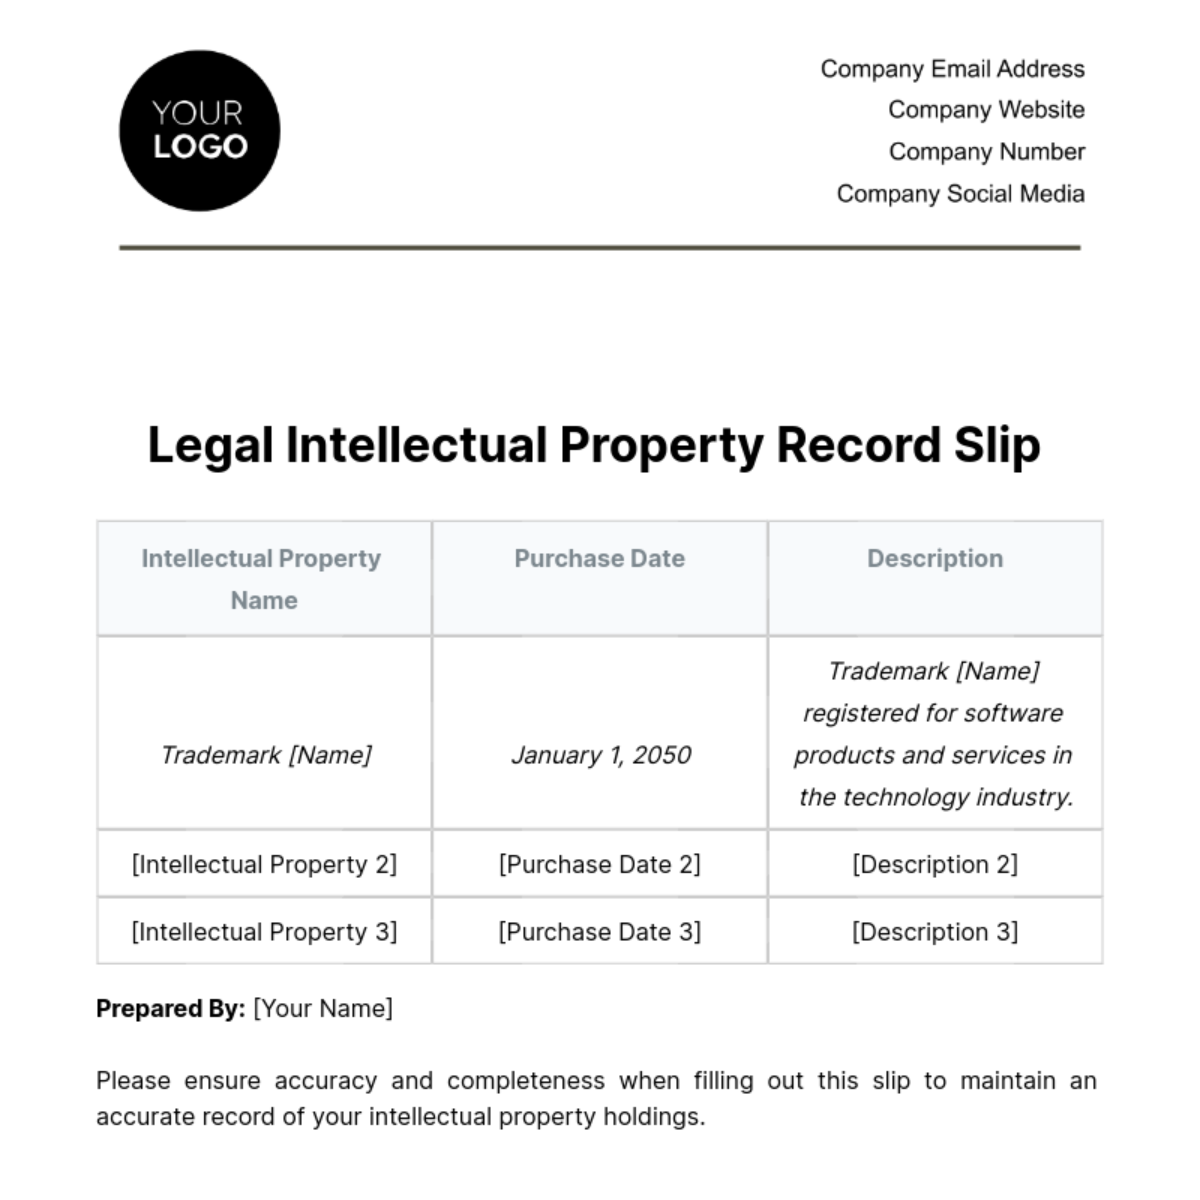 Free Legal Intellectual Property Record Slip Template